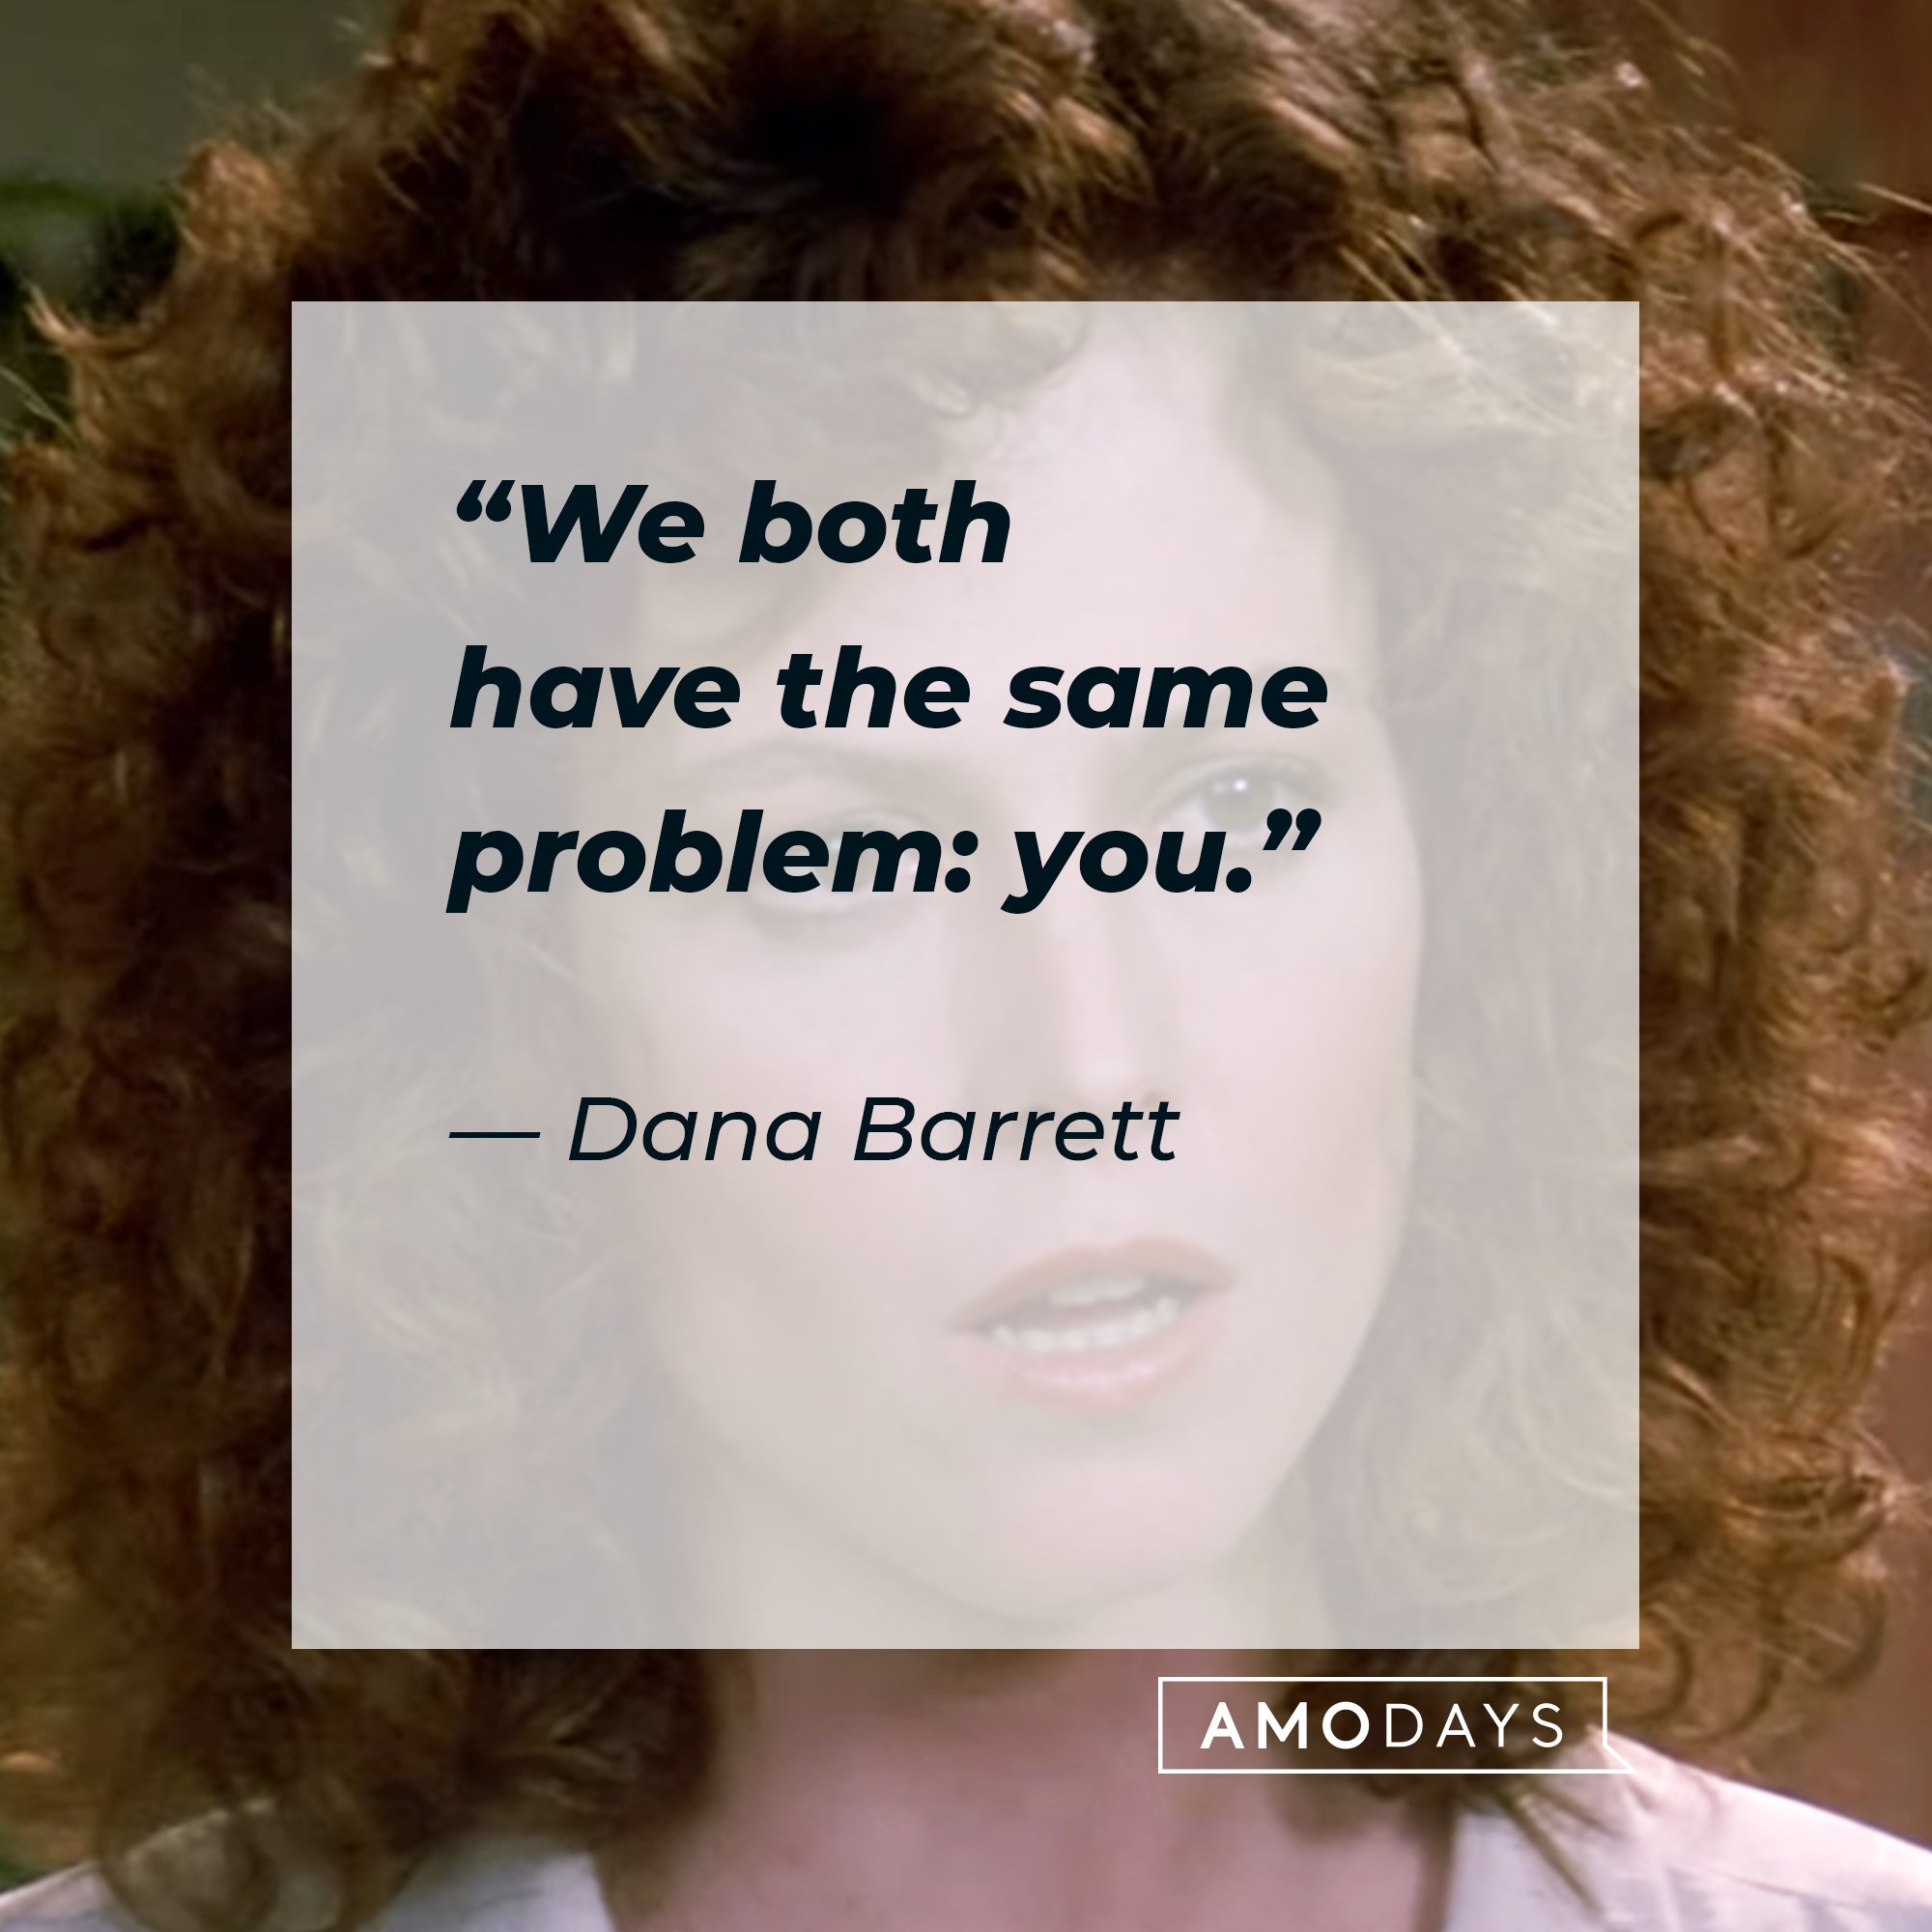 Dana Barrett's quote: “We both have the same problem: you.” | Image: AmoDays